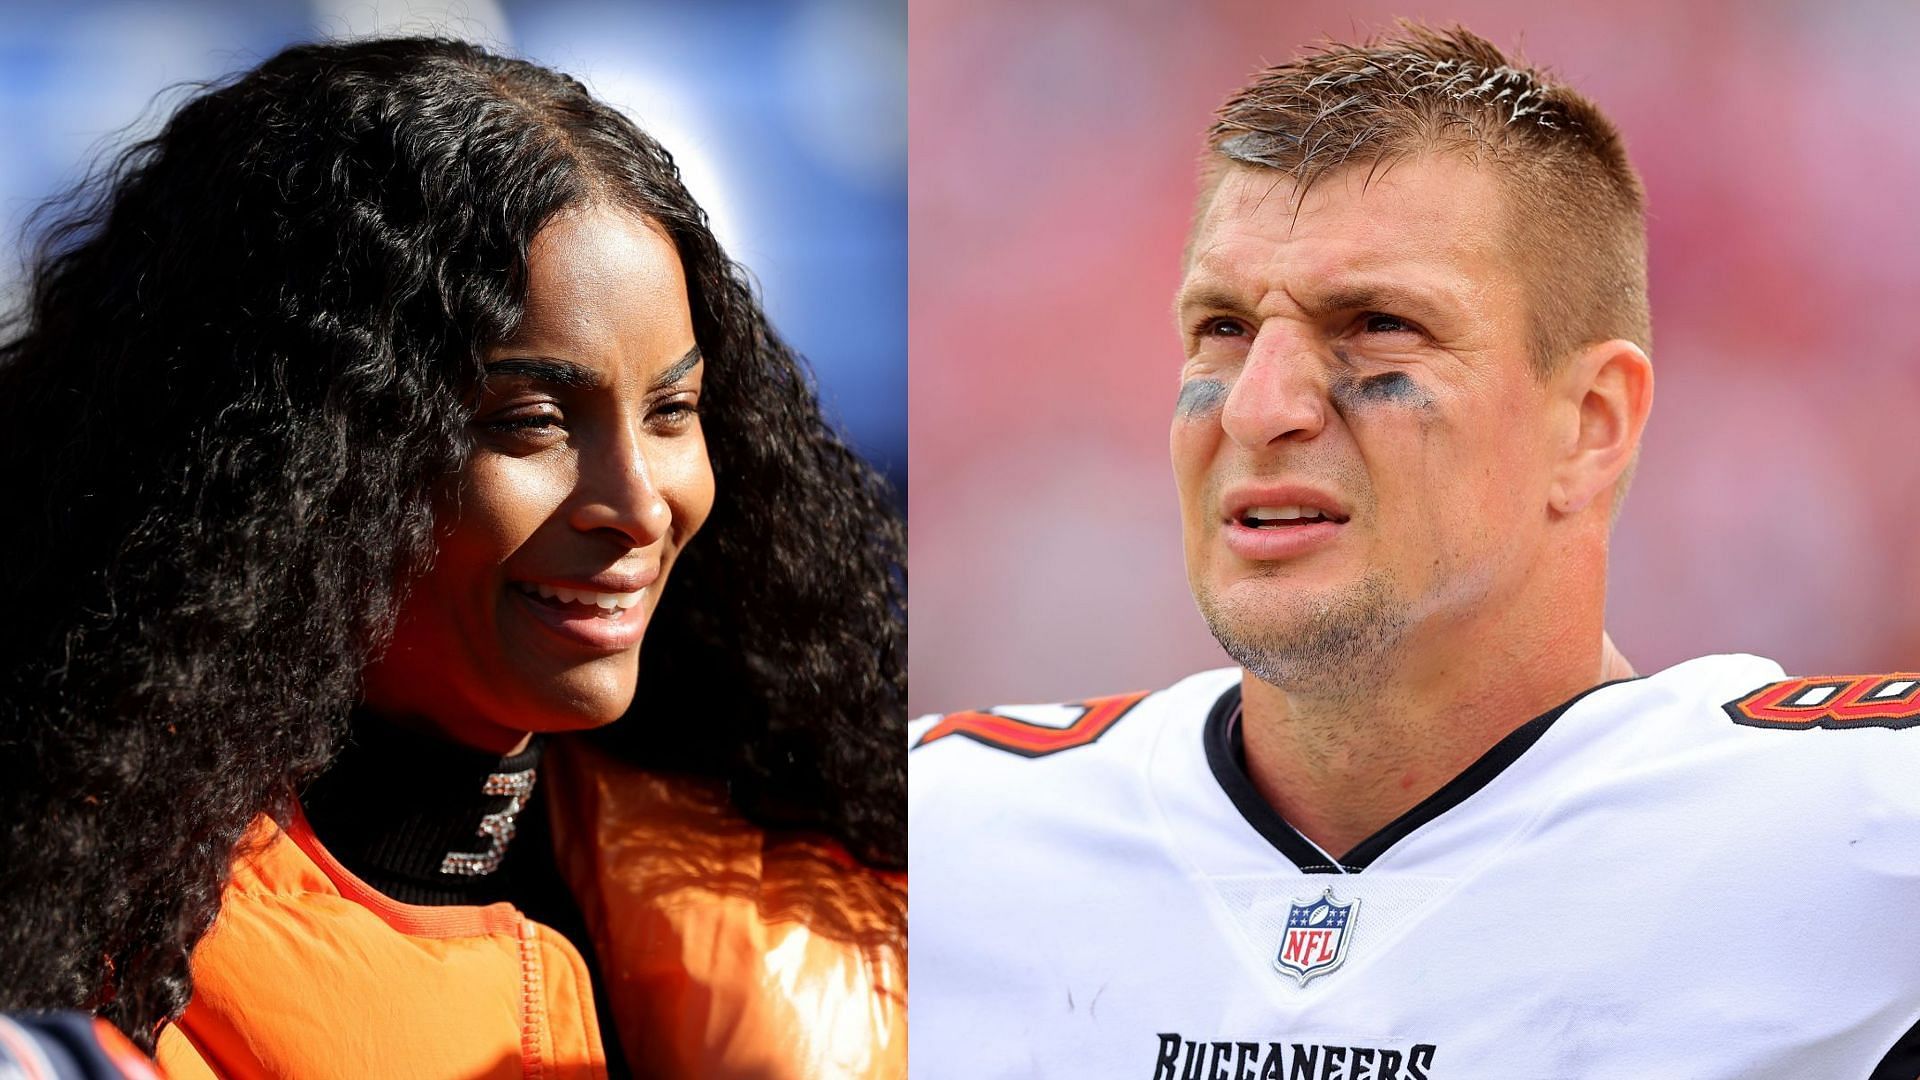 Gronkowski had some kind words for Ciara after her NFL drill work out at the White House.